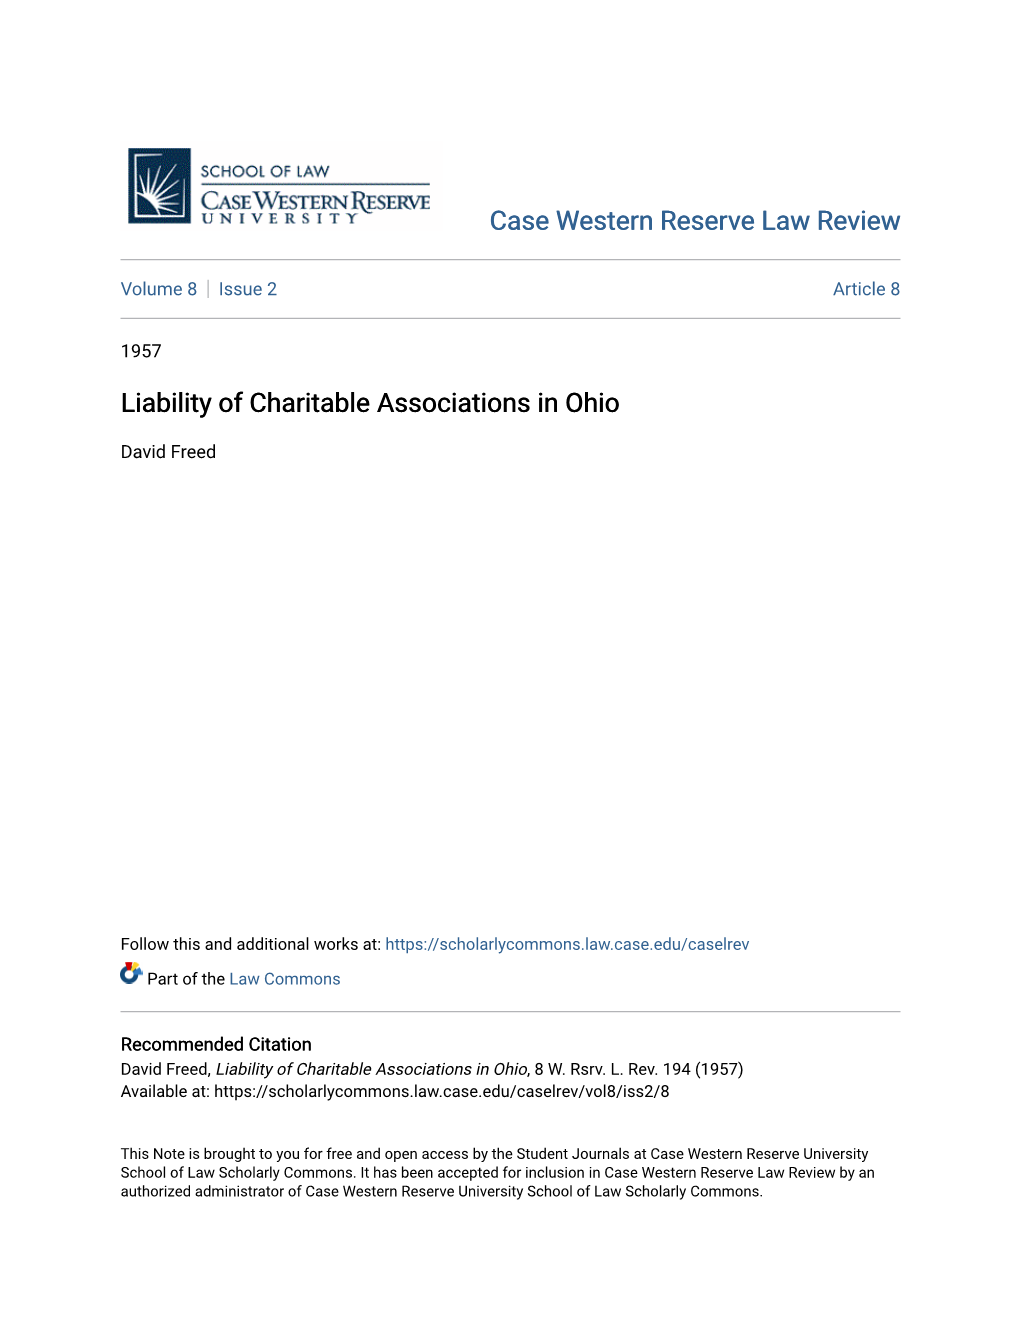 Liability of Charitable Associations in Ohio